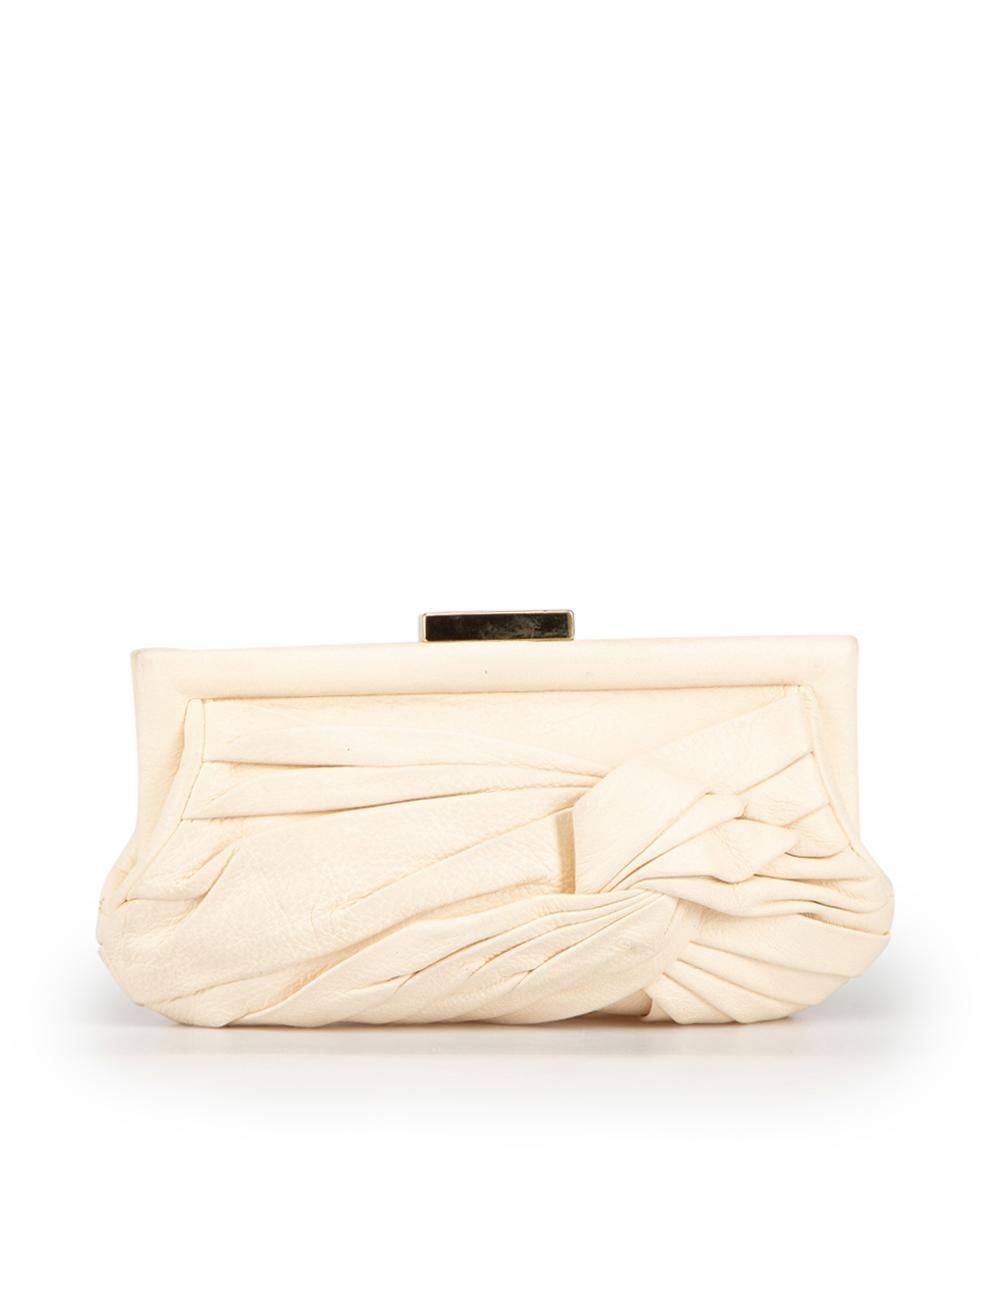 Anya Hindmarch Cream Leather Knot Frame Clutch In Good Condition For Sale In London, GB